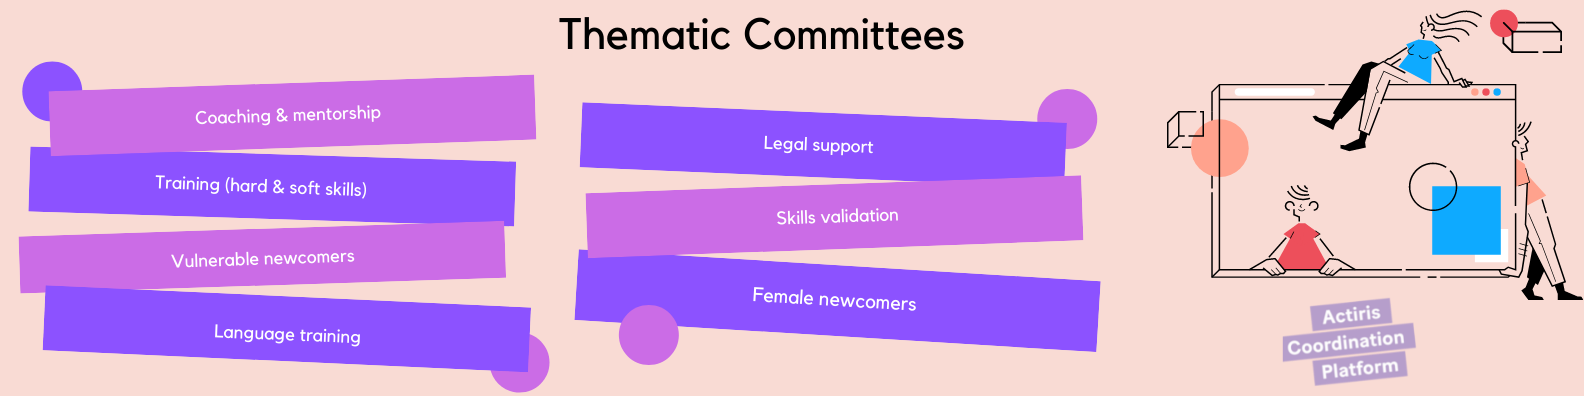 Thematic Committees